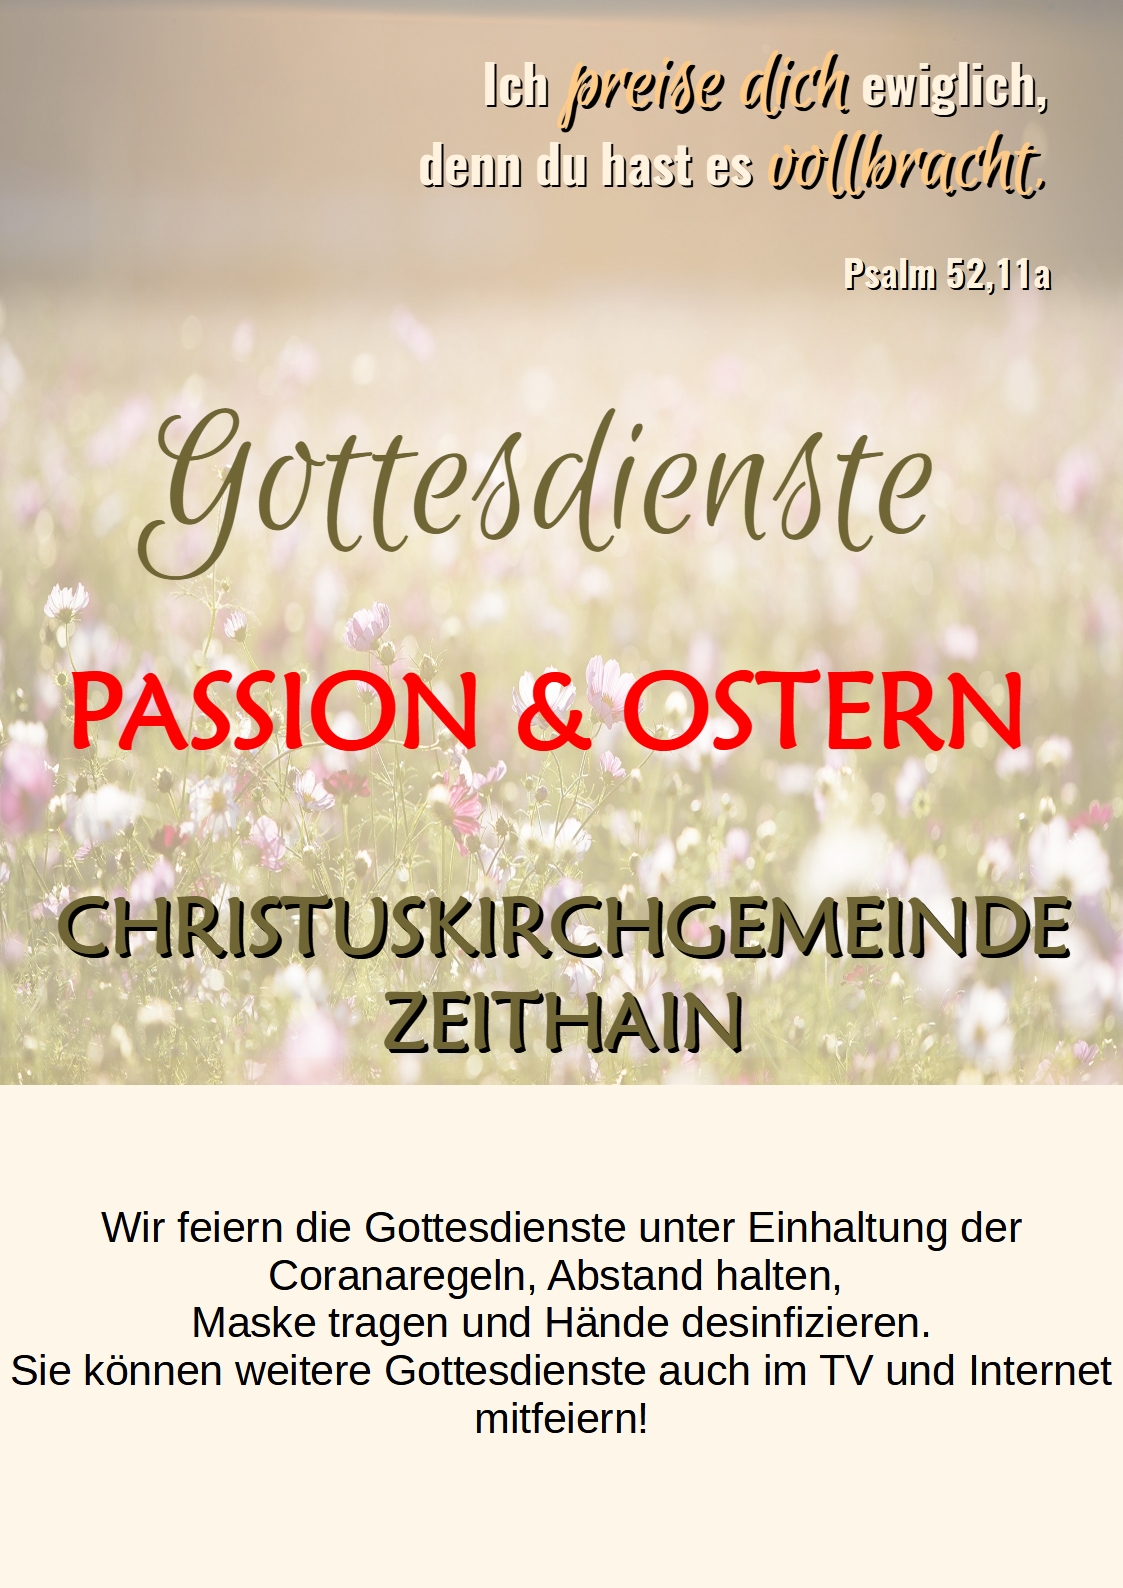 Passion Ostern 2021